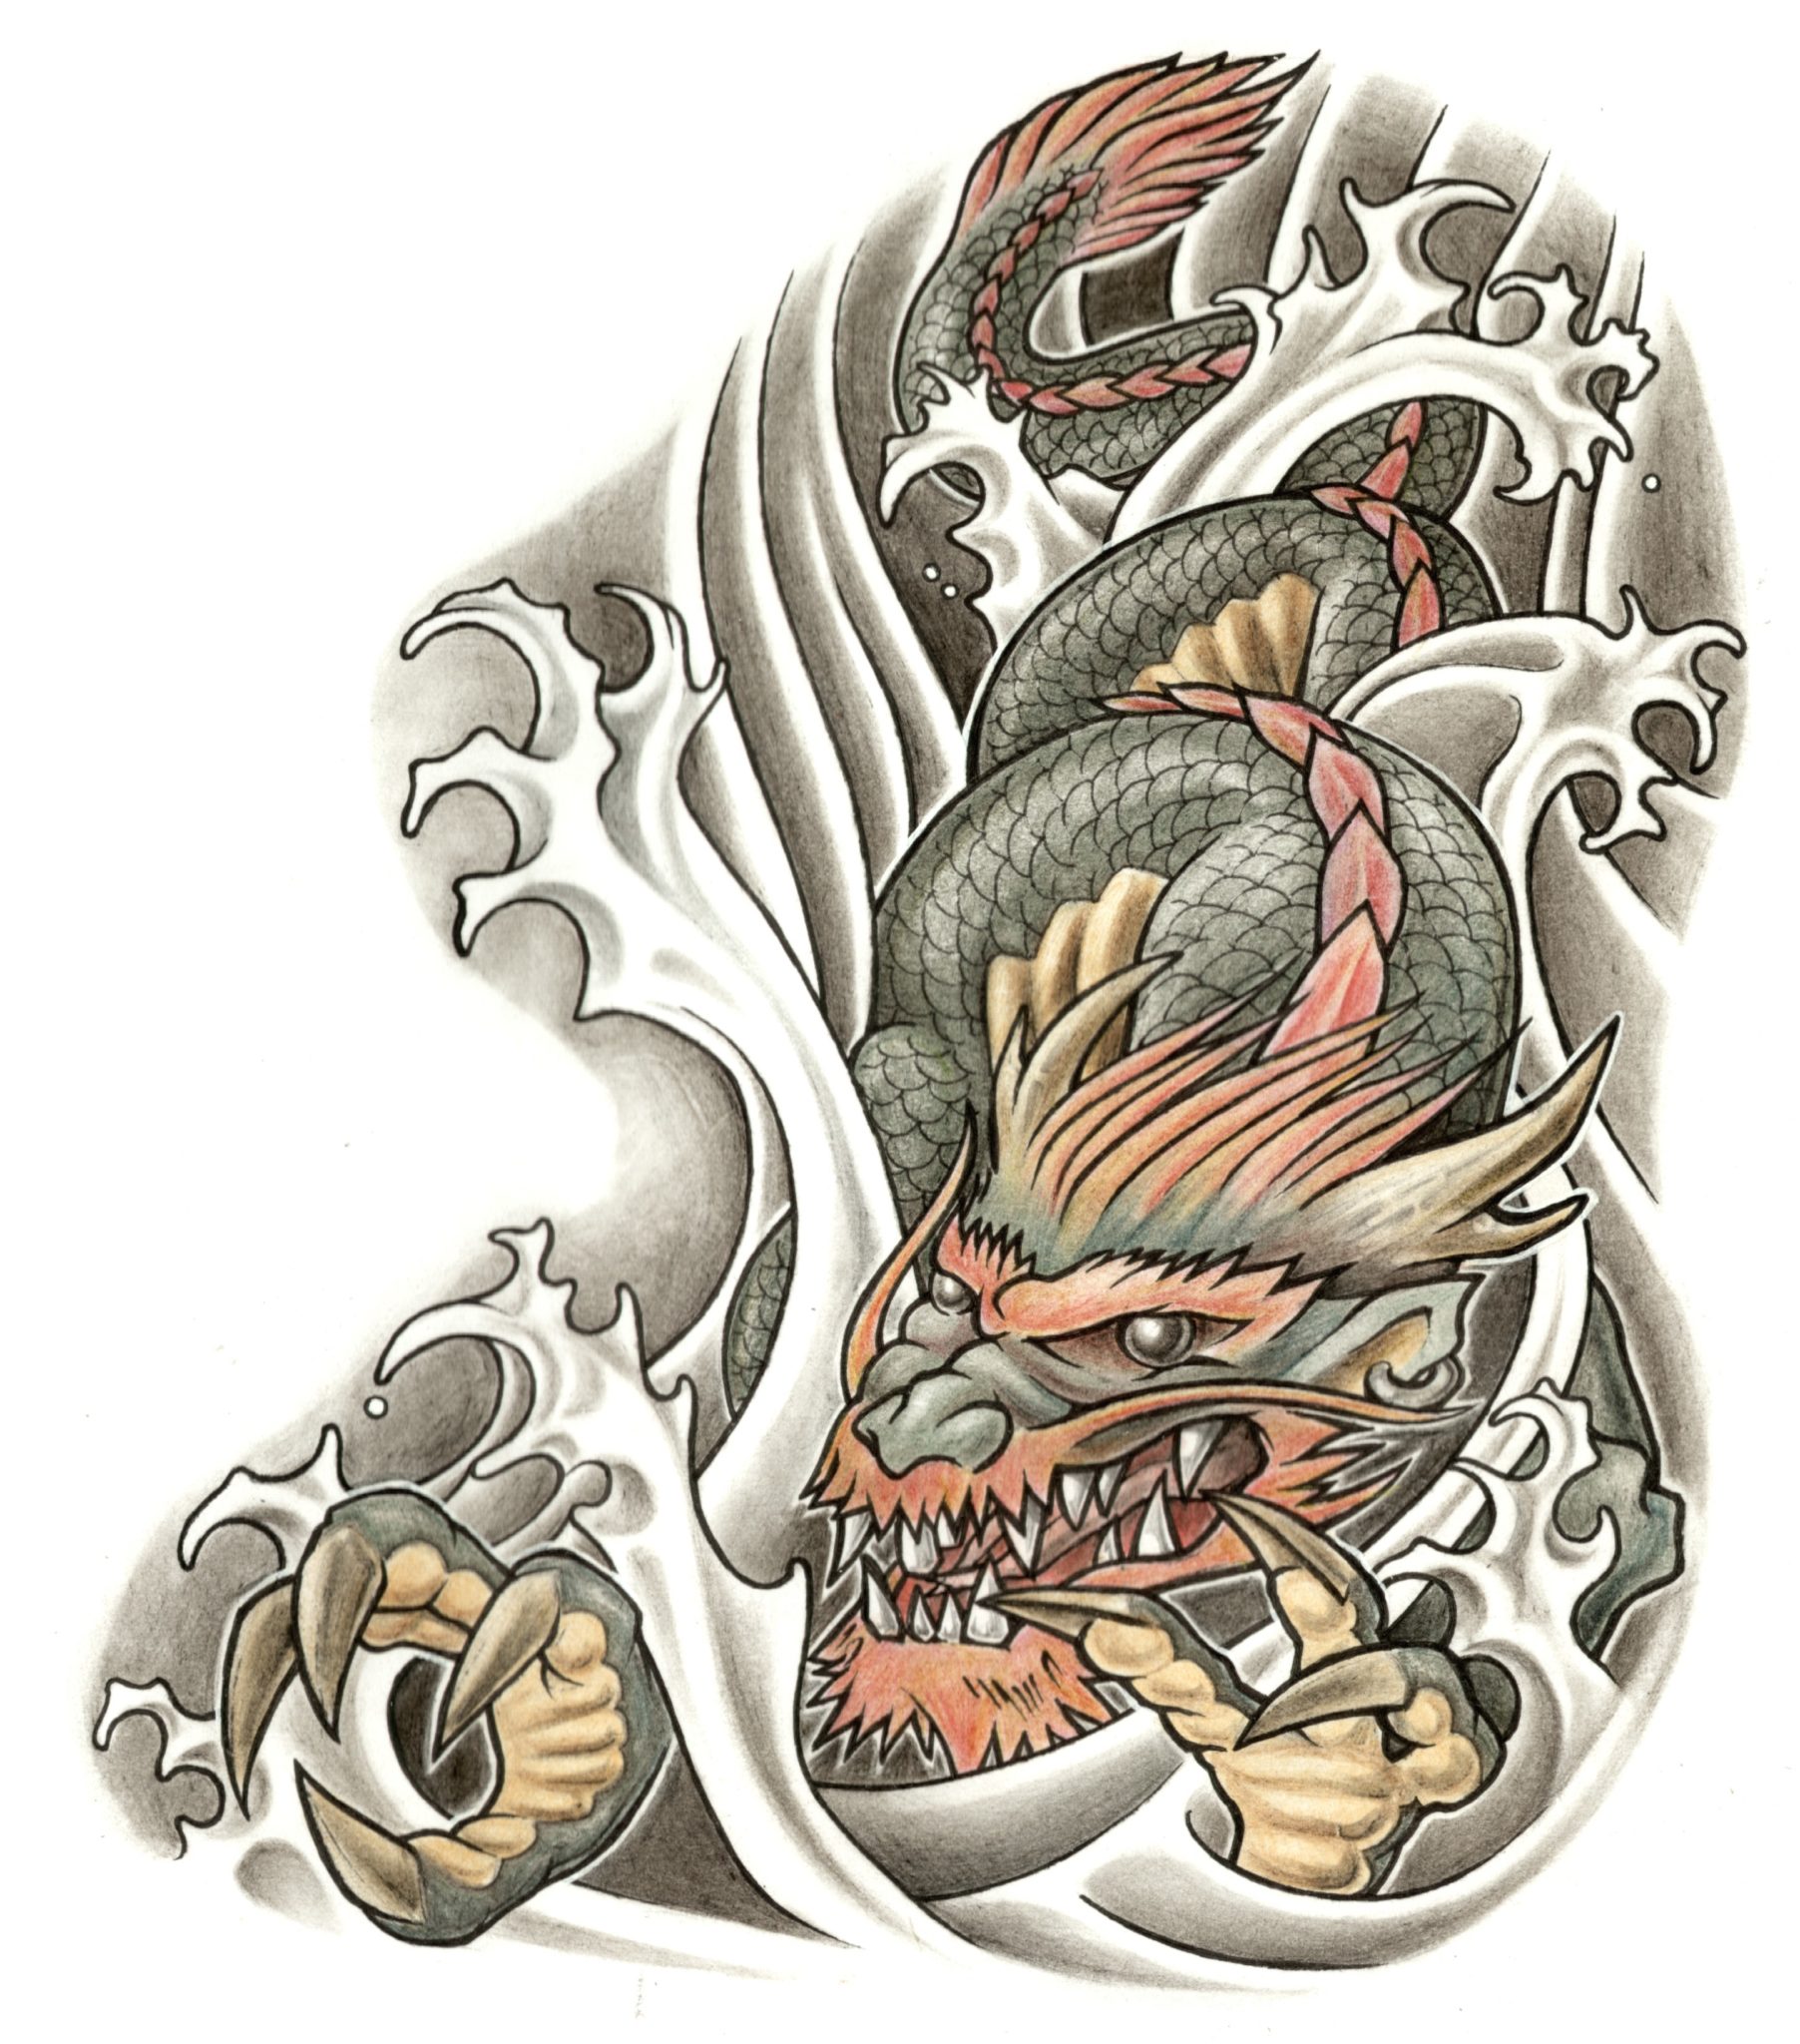 60 Awesome Dragon Tattoo Designs For Men